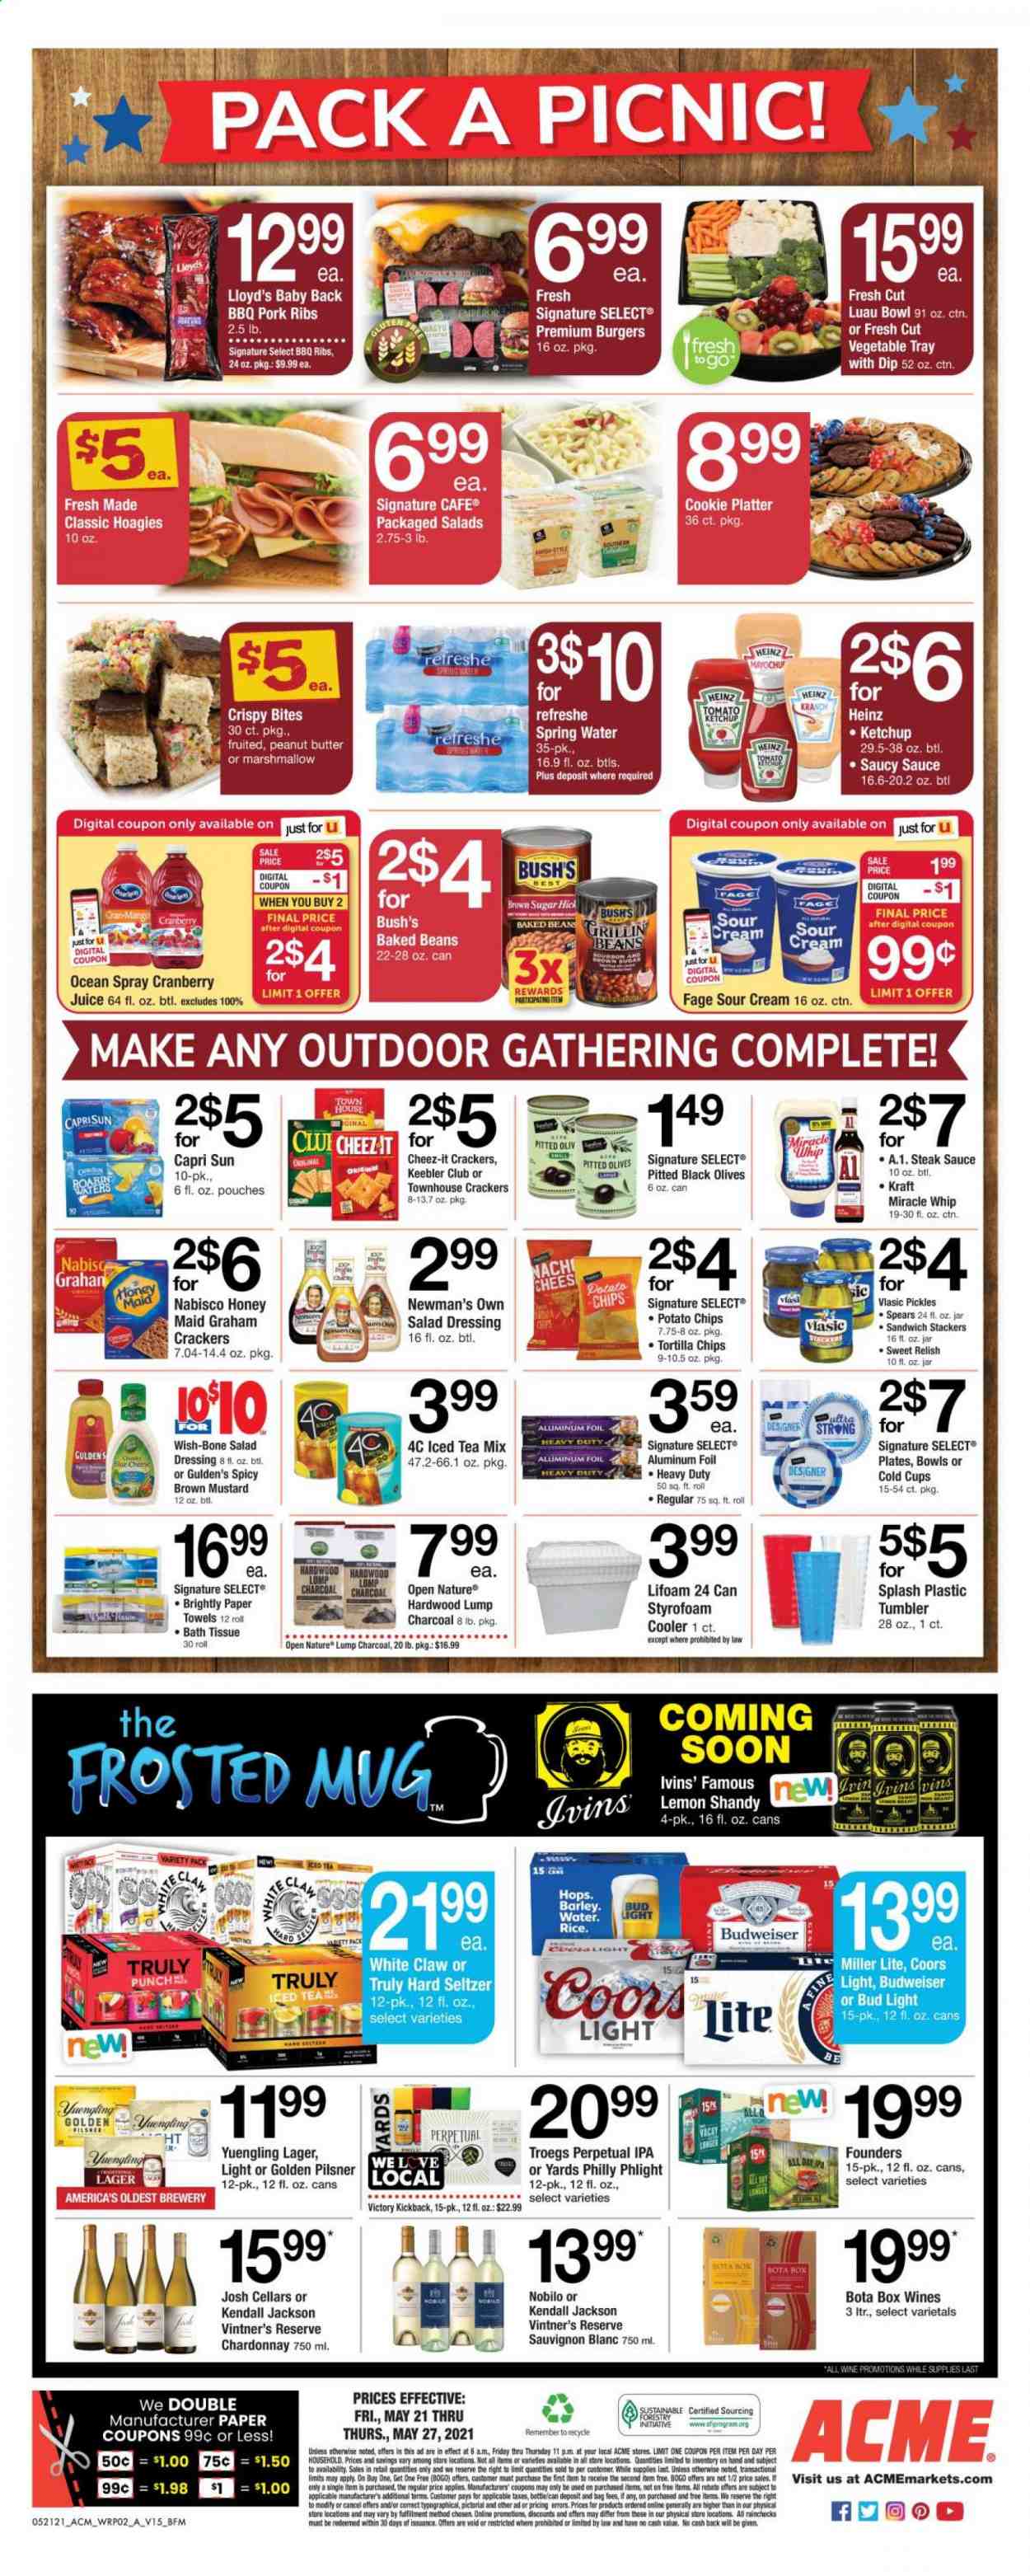 thumbnail - ACME Flyer - 05/21/2021 - 05/27/2021 - Sales products - beans, sandwich, hamburger, sauce, Kraft®, sour cream, Miracle Whip, dip, graham crackers, crackers, Keebler, tortilla chips, potato chips, chips, Cheez-It, cane sugar, Heinz, pickles, olives, baked beans, Honey Maid, mustard, salad dressing, steak sauce, ketchup, dressing, peanut butter, Capri Sun, cranberry juice, juice, ice tea, spring water, white wine, Chardonnay, Sauvignon Blanc, punch, White Claw, Hard Seltzer, TRULY, beer, Budweiser, Miller Lite, Coors, Yuengling, Bud Light, Lager, Golden Pilsner, IPA, steak, pork meat, pork ribs, pork back ribs, bath tissue, kitchen towels, paper towels, fork, mug, tray, tumbler, plate, cup, aluminium foil, bag. Page 2.